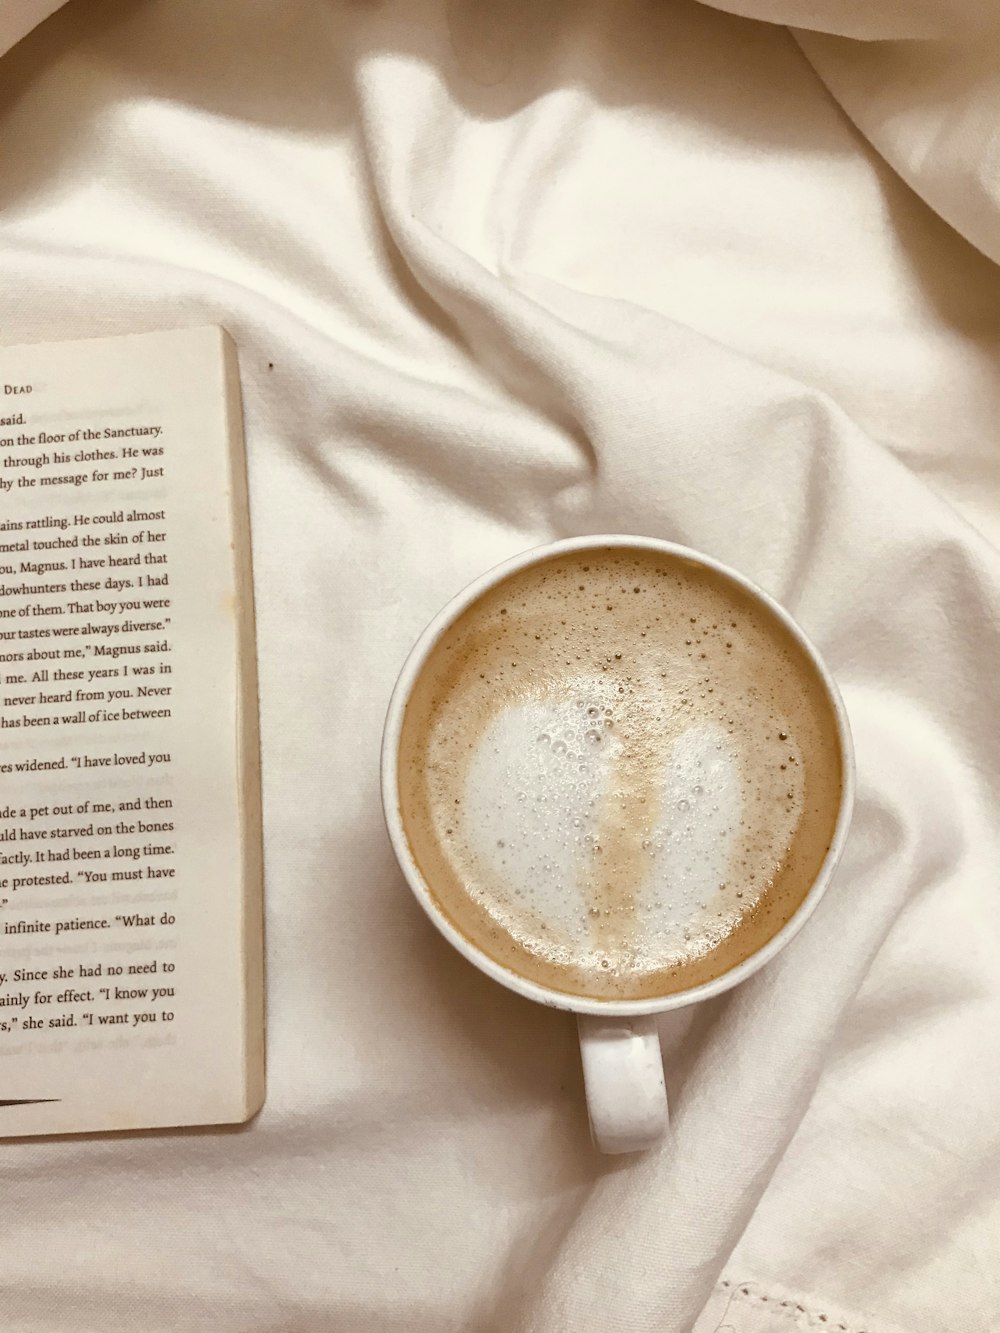 Premium AI Image  aesthetic old books atmosphere with coffee